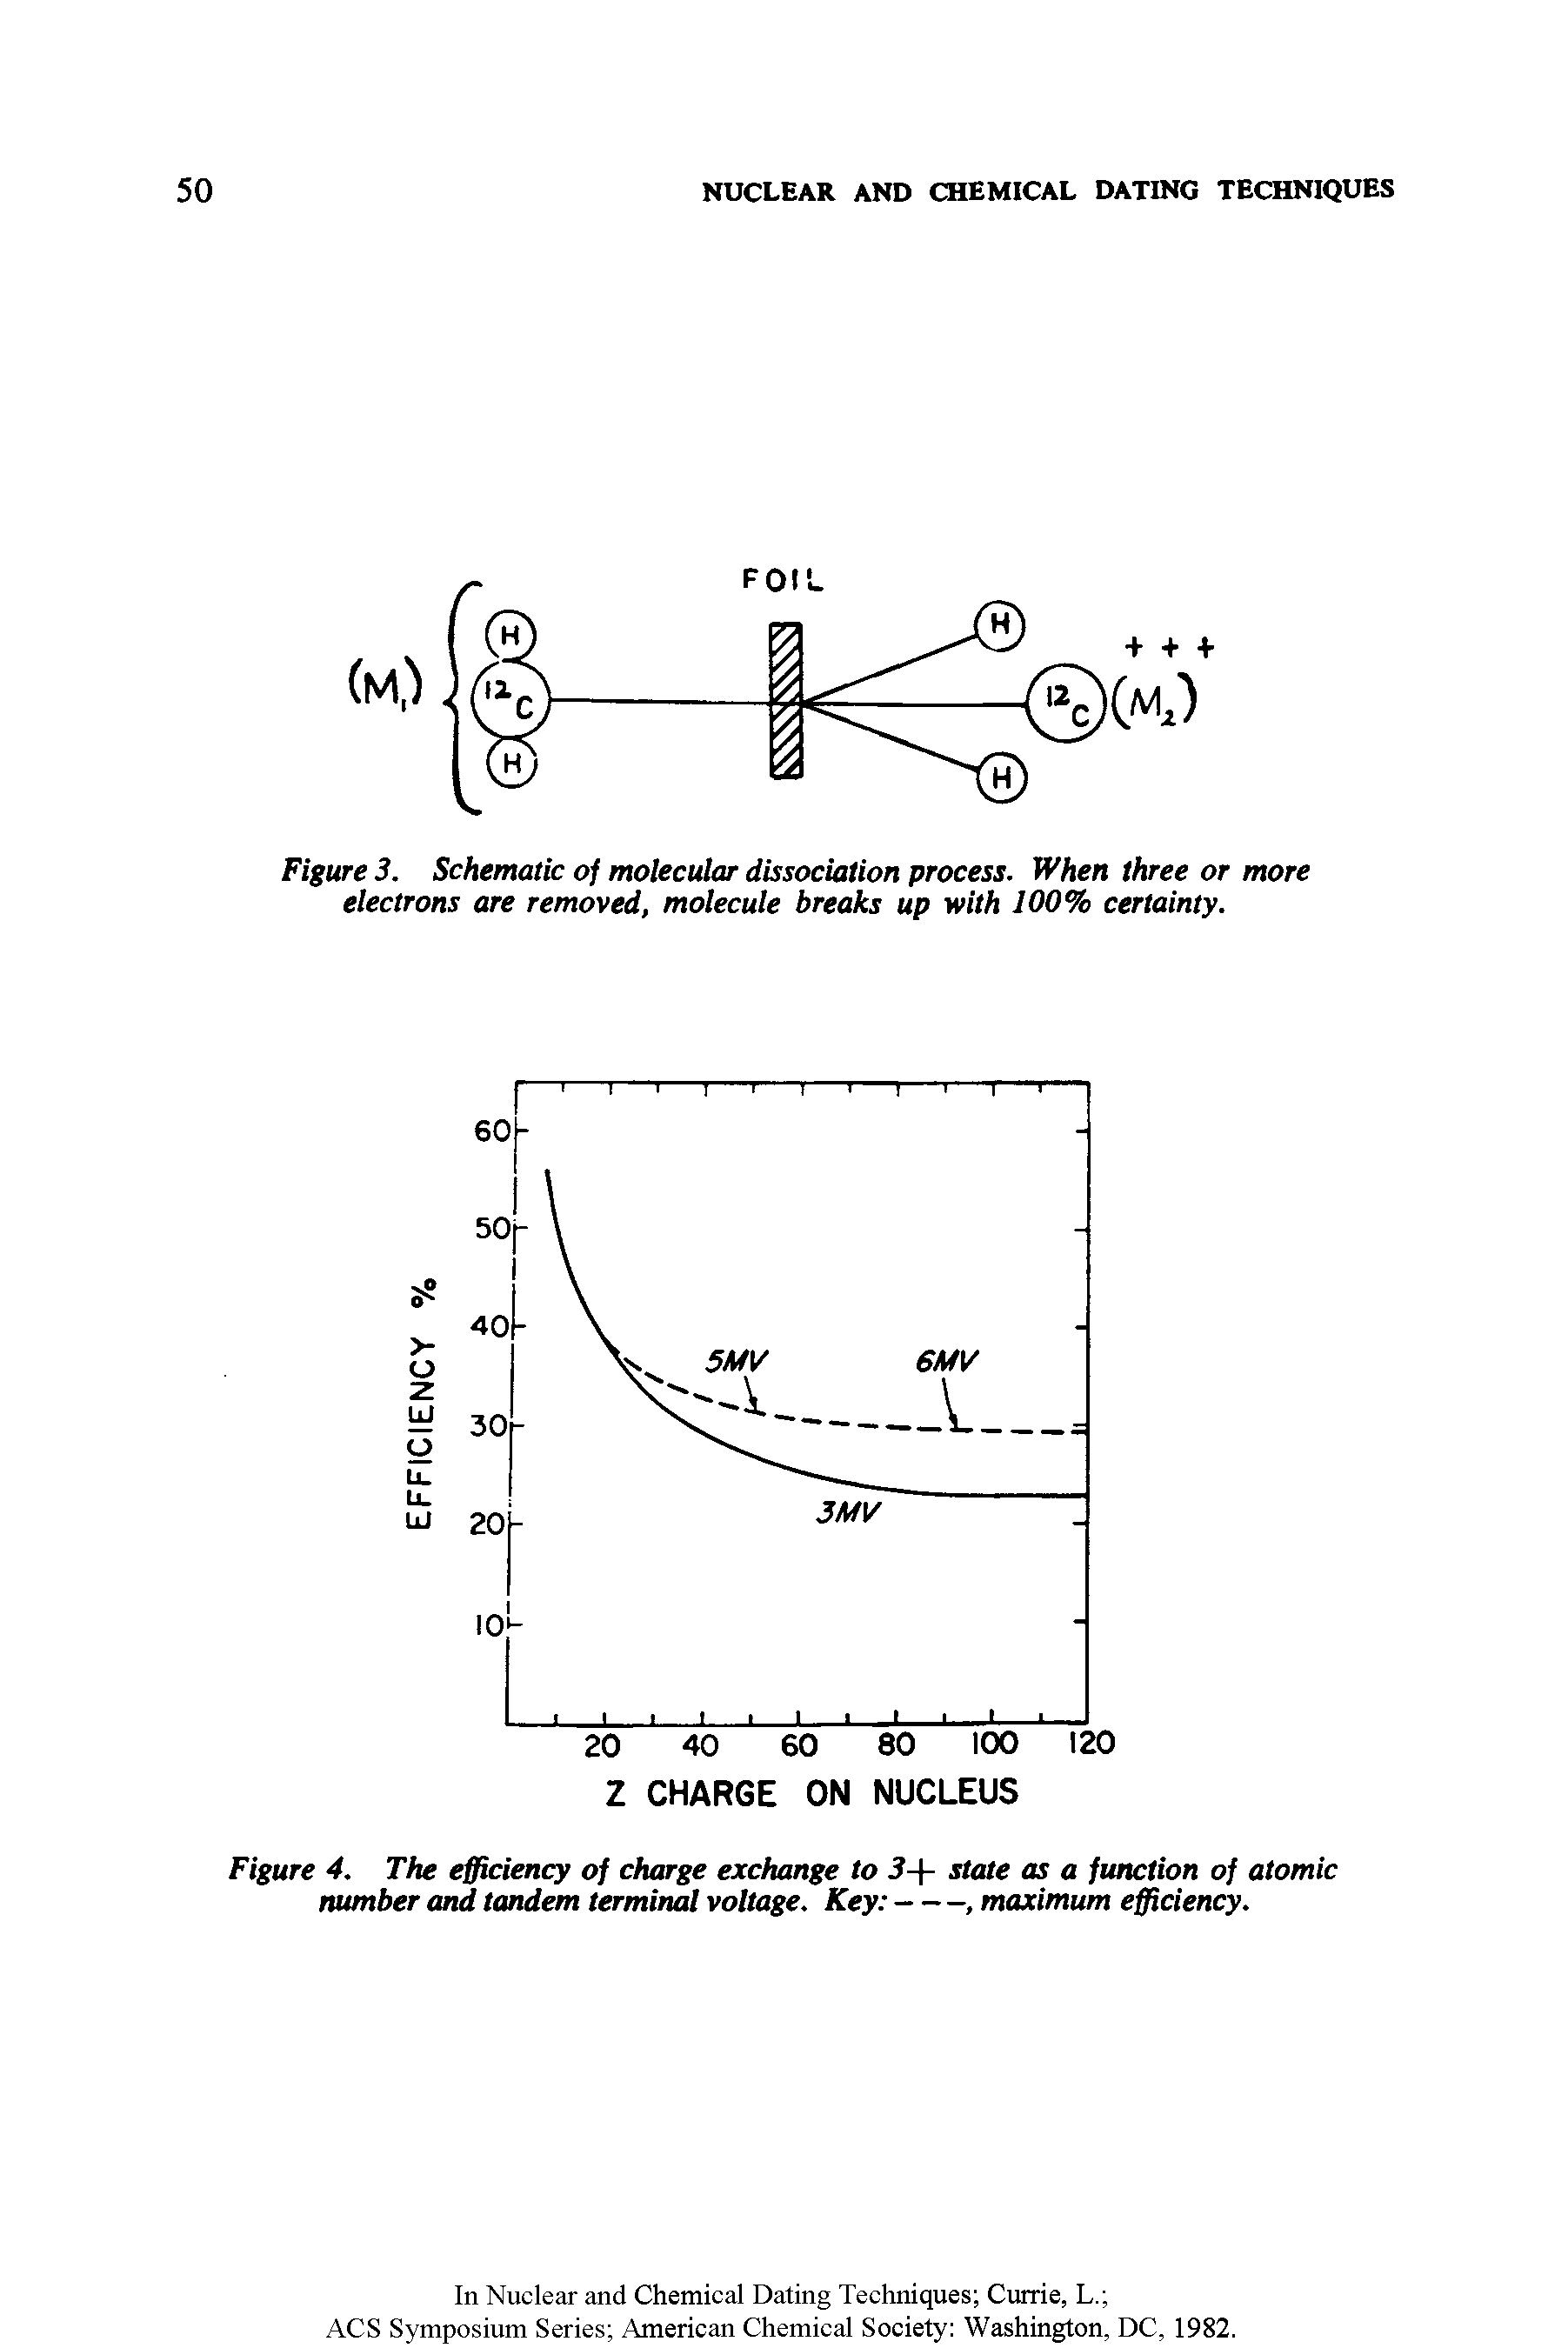 Figure 4. The efficiency of charge exchange to 3+ state as a function of atomic number and tandem terminal voltage. Key ------------------------, maximum efficiency.